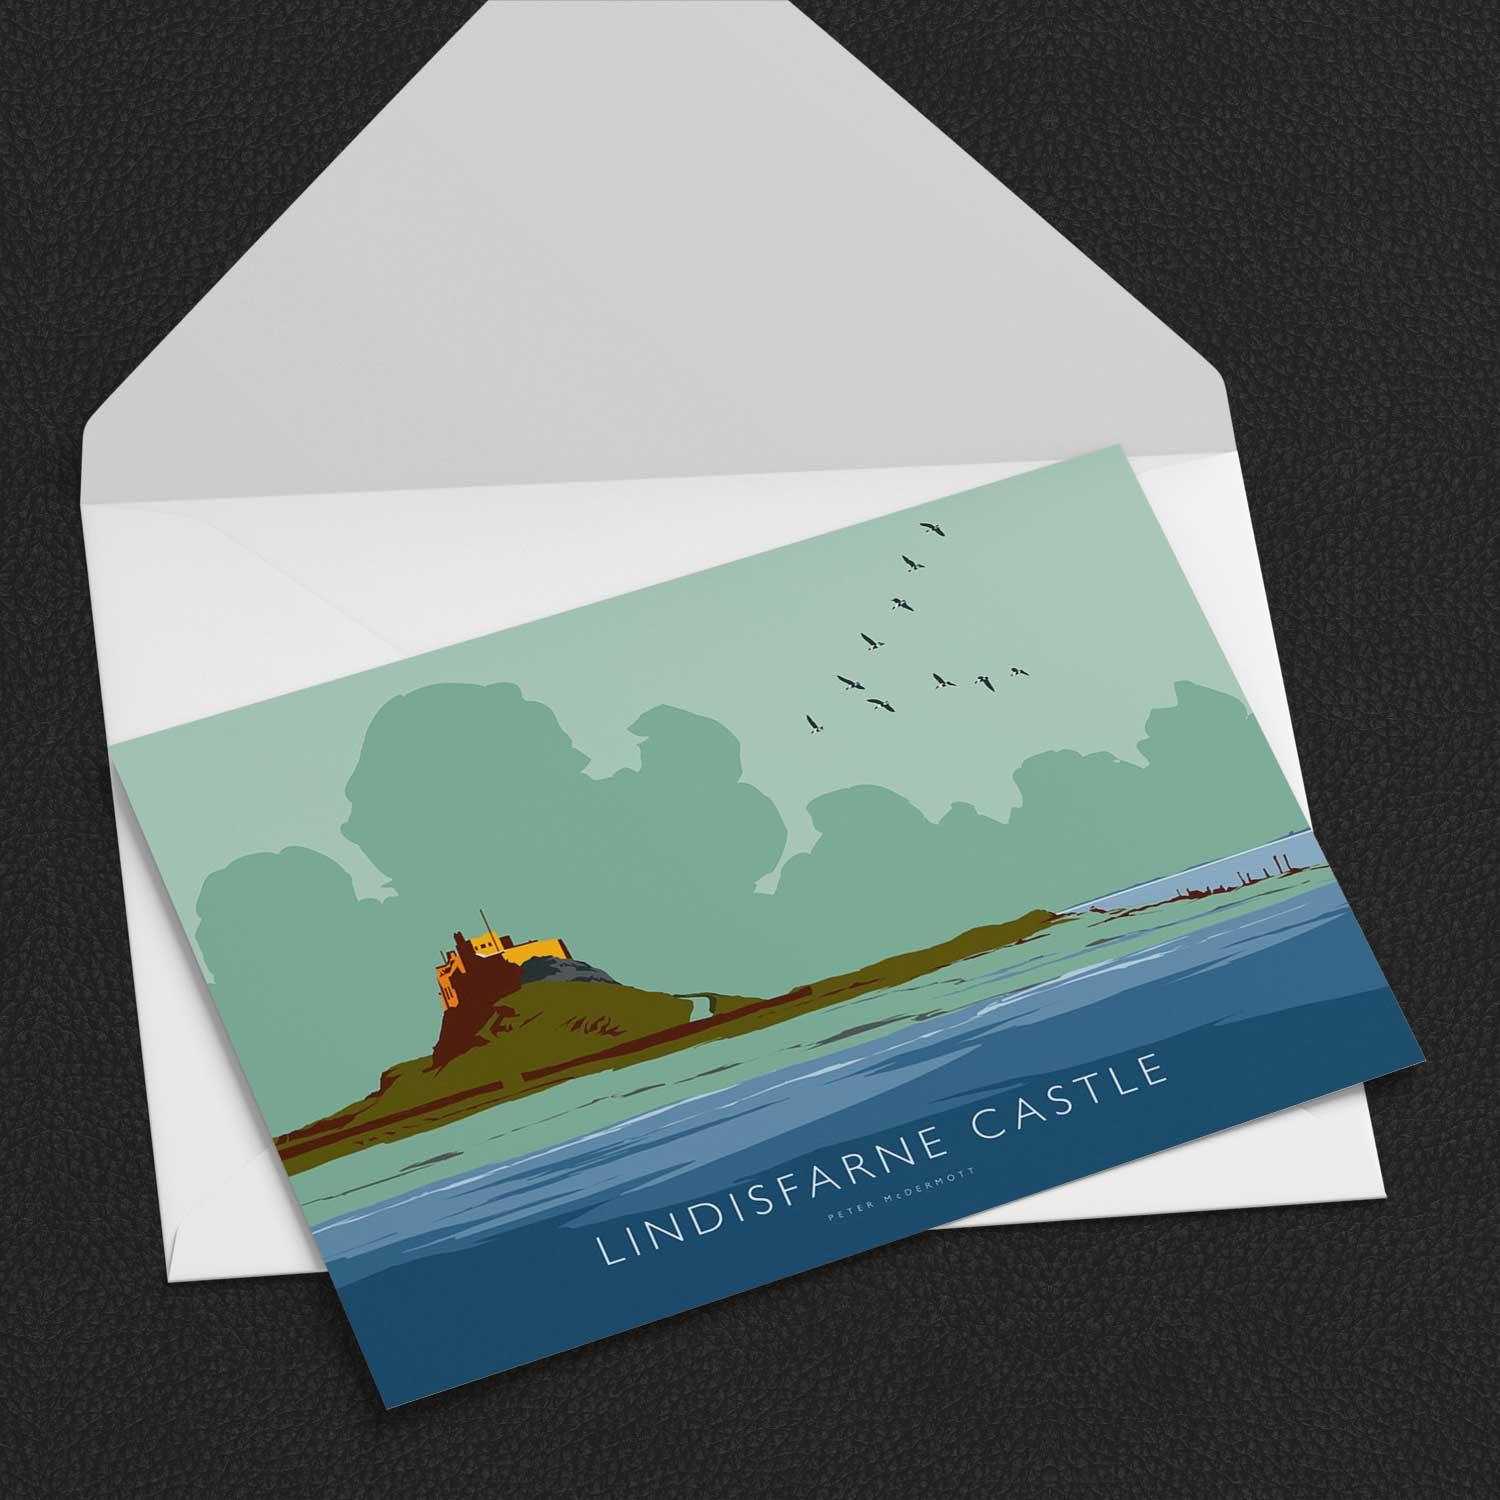 Lindisfarne Castle Greeting Card from an original painting by artist Peter McDermott